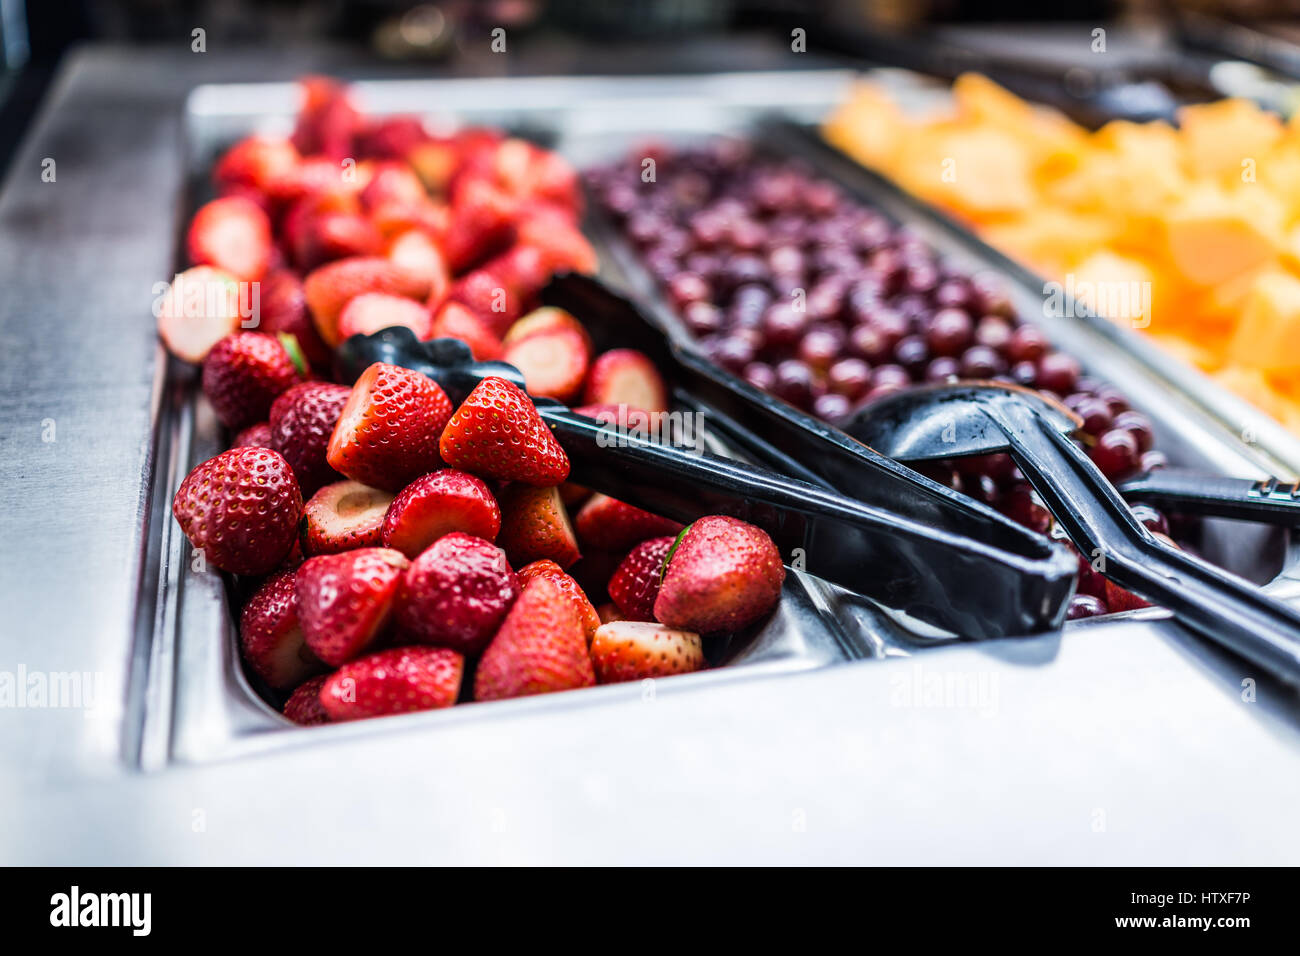 Fruit salad bar with whole strawberries and grapes Stock Photo